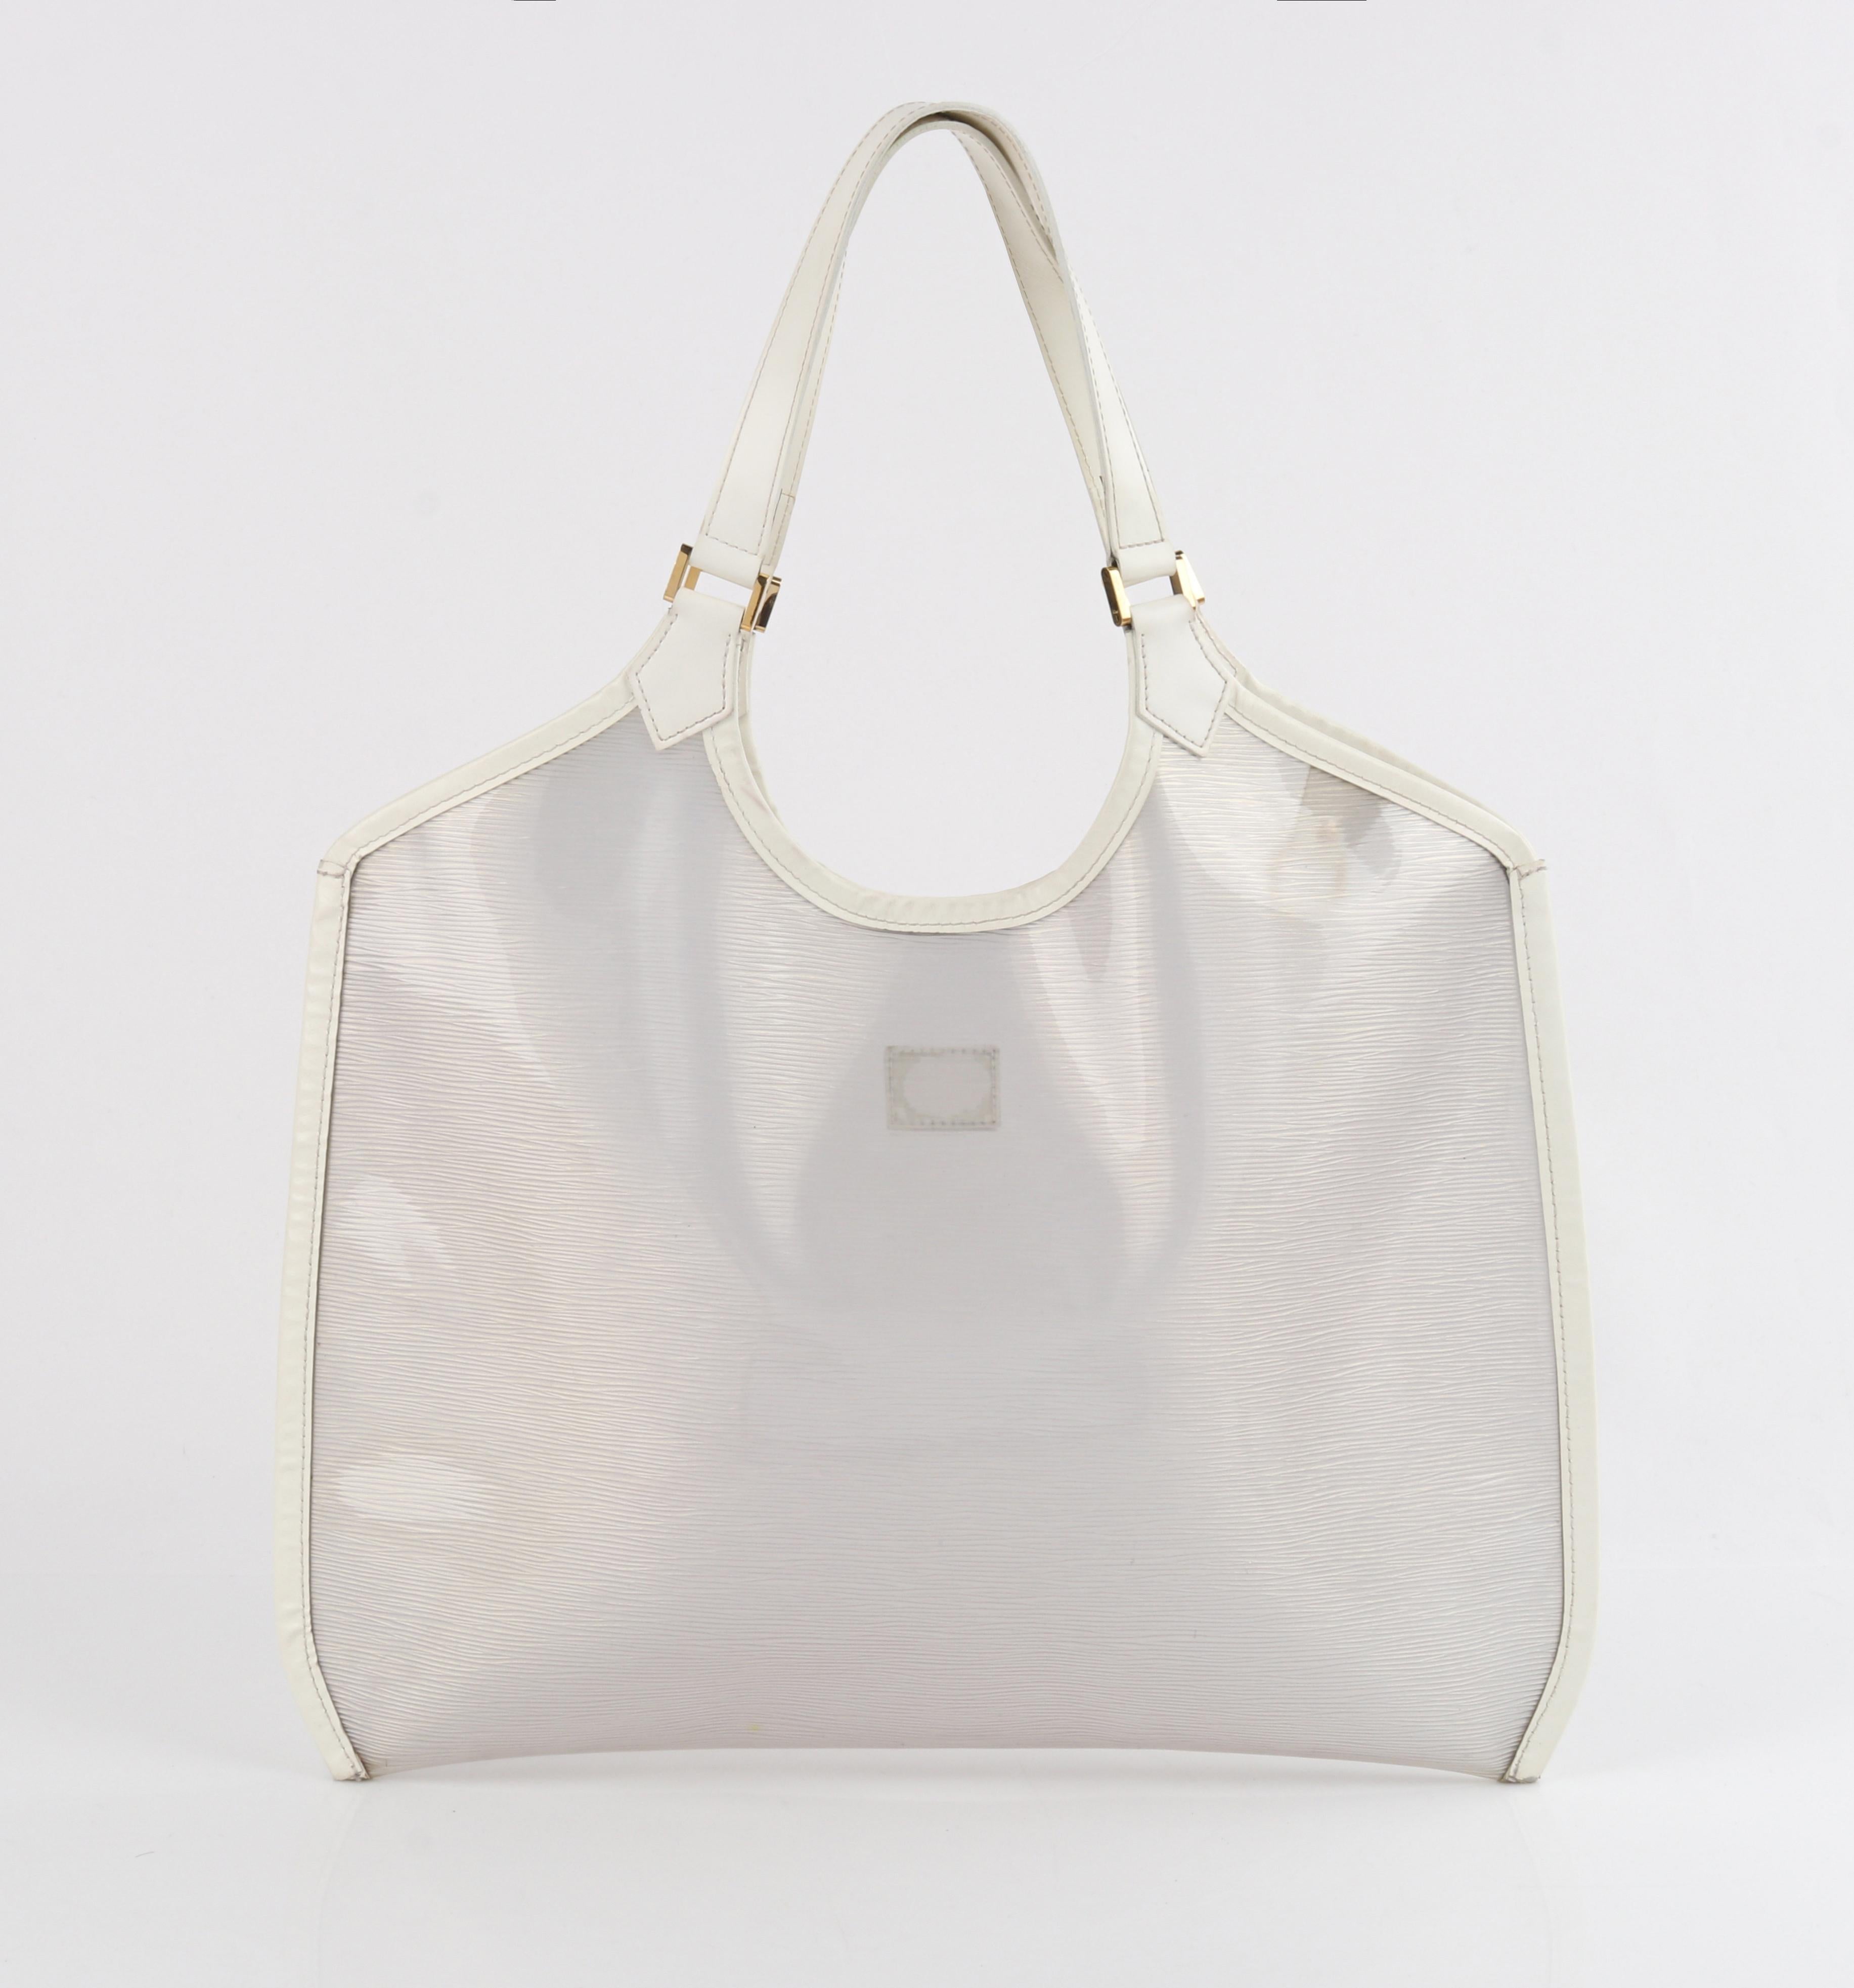 Brand / Manufacturer: Louis Vuitton
Collection: Spring 2001
Designer: Marc Jacobs
Manufacturer Style Name: Translucent Epi Baia Plage
Style: Tote bag
Color(s): Shades of white, iridescent clear
Lined: No
Unmarked Fabric Content (feel of): Epi